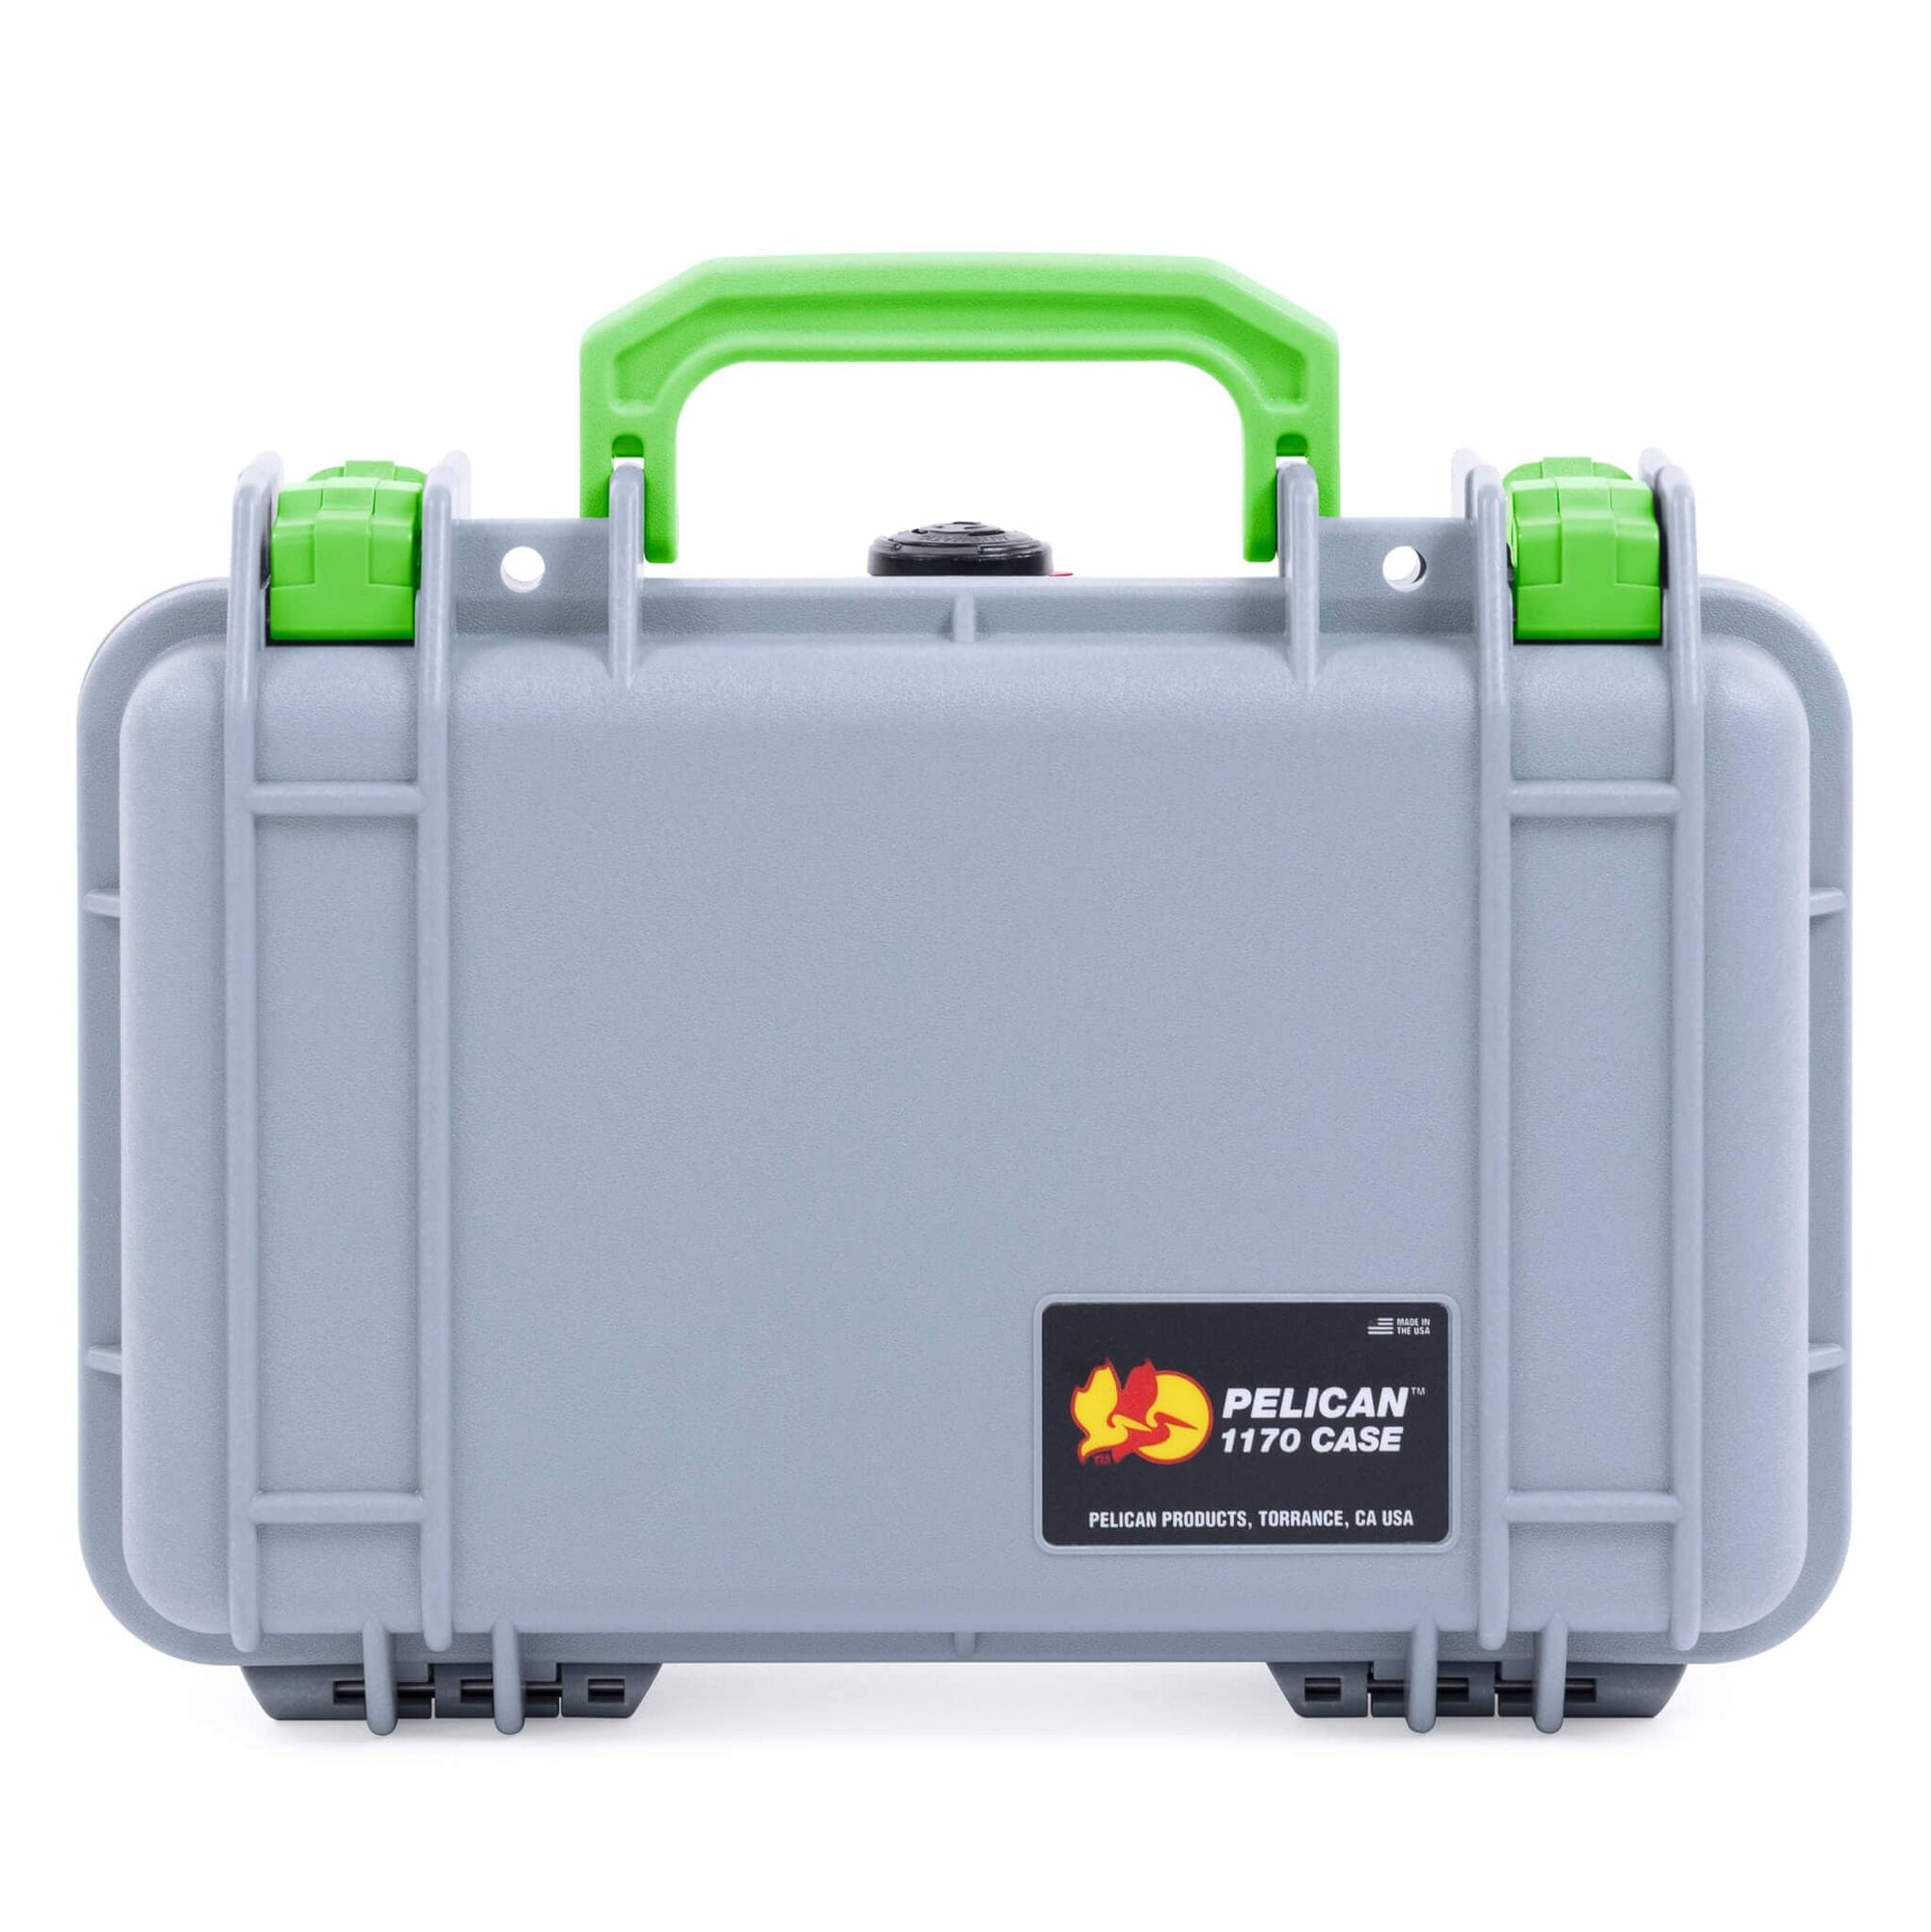 Pelican 1170 Case, Silver with Lime Green Handle & Latches ColorCase 